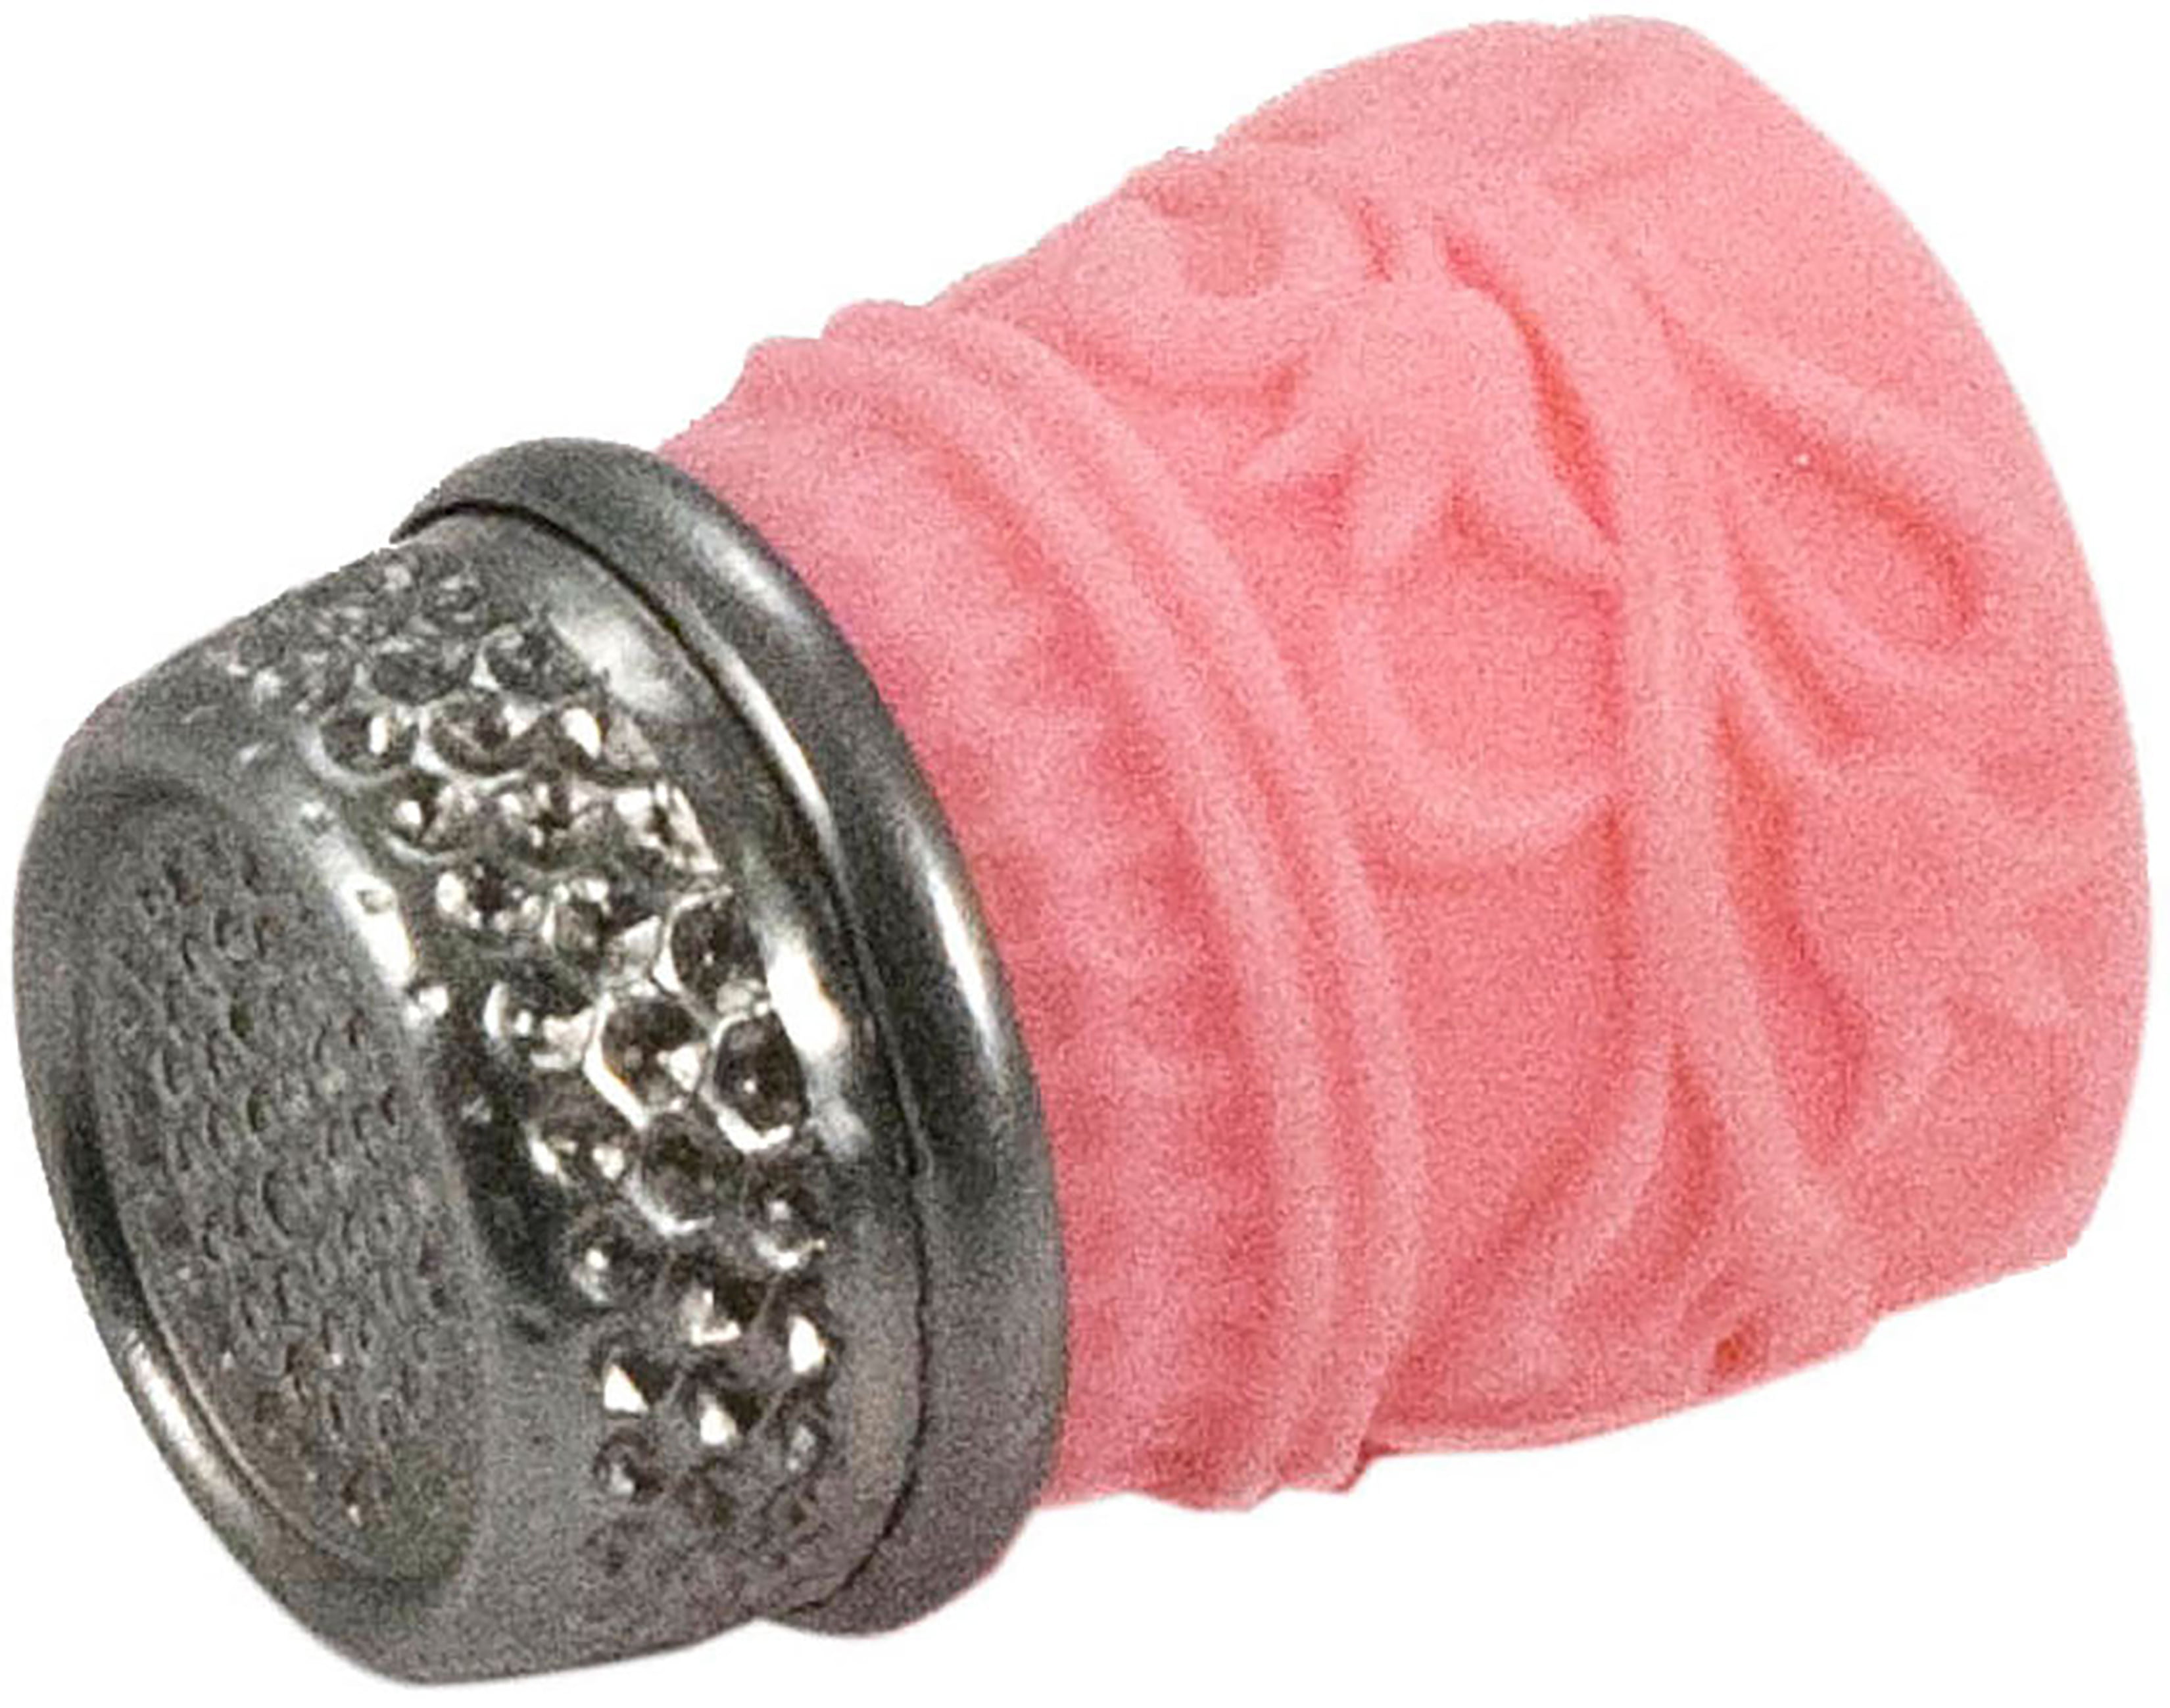 Silicone thimble from $1 store : r/StonerEngineering